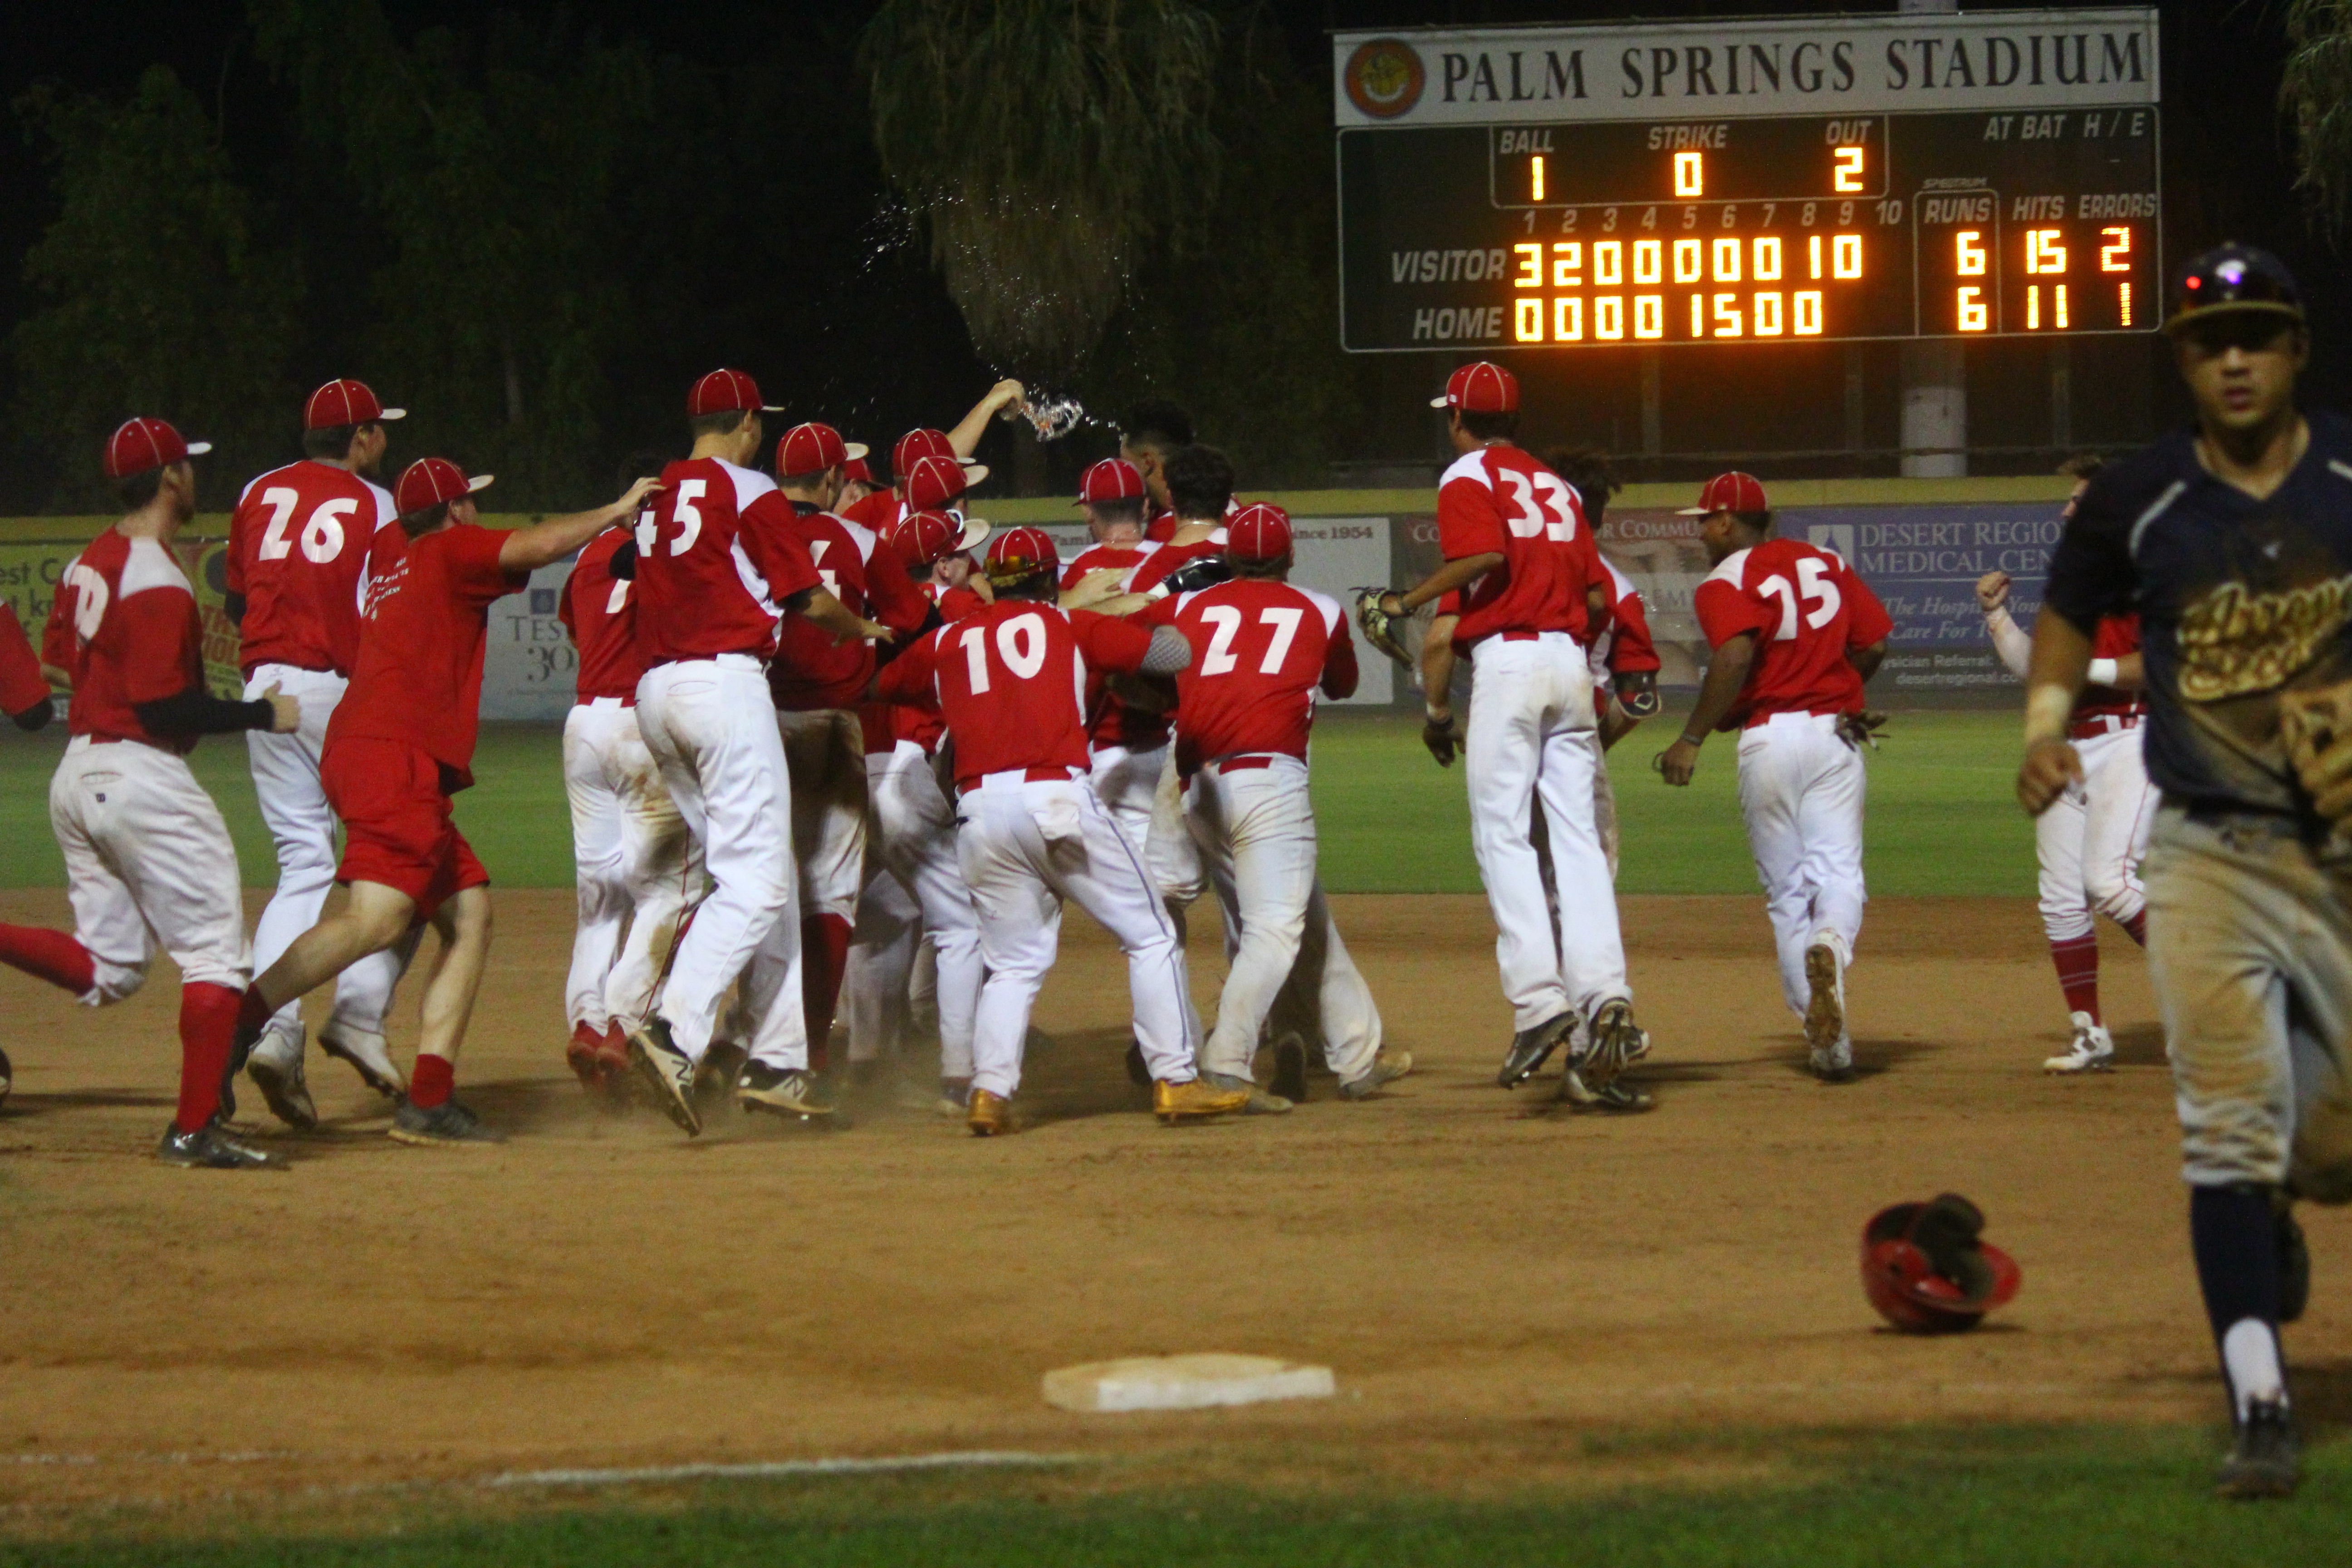 POWER WALK-OFF VICTORY ELIMINATES SENTINELS, WILL FACE FORCE IN SCCBL CHAMPIONSHIP